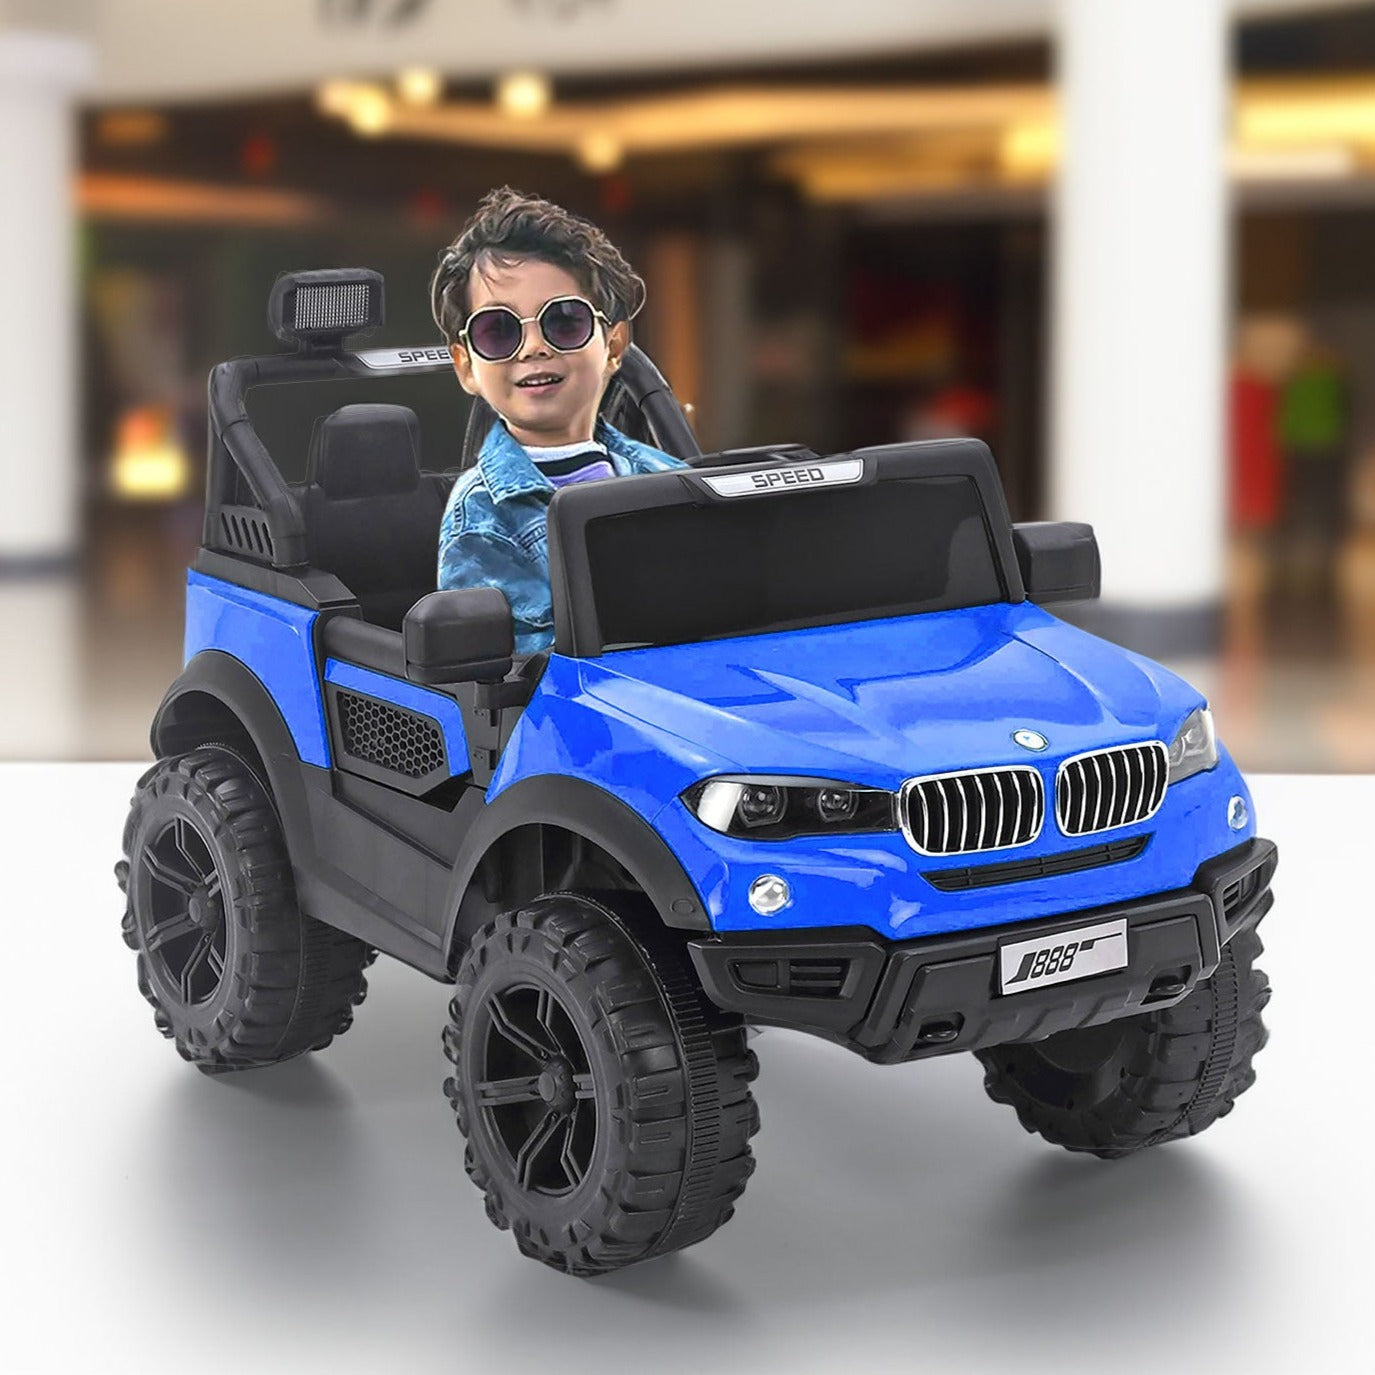 Baby Moo 4X4 Mercedes Benz Electric Ride-On Car for Kids | Rechargeable Battery | Bluetooth Remote Control | USB MP3 Player | Double Seat | Age 2-6 - Blue